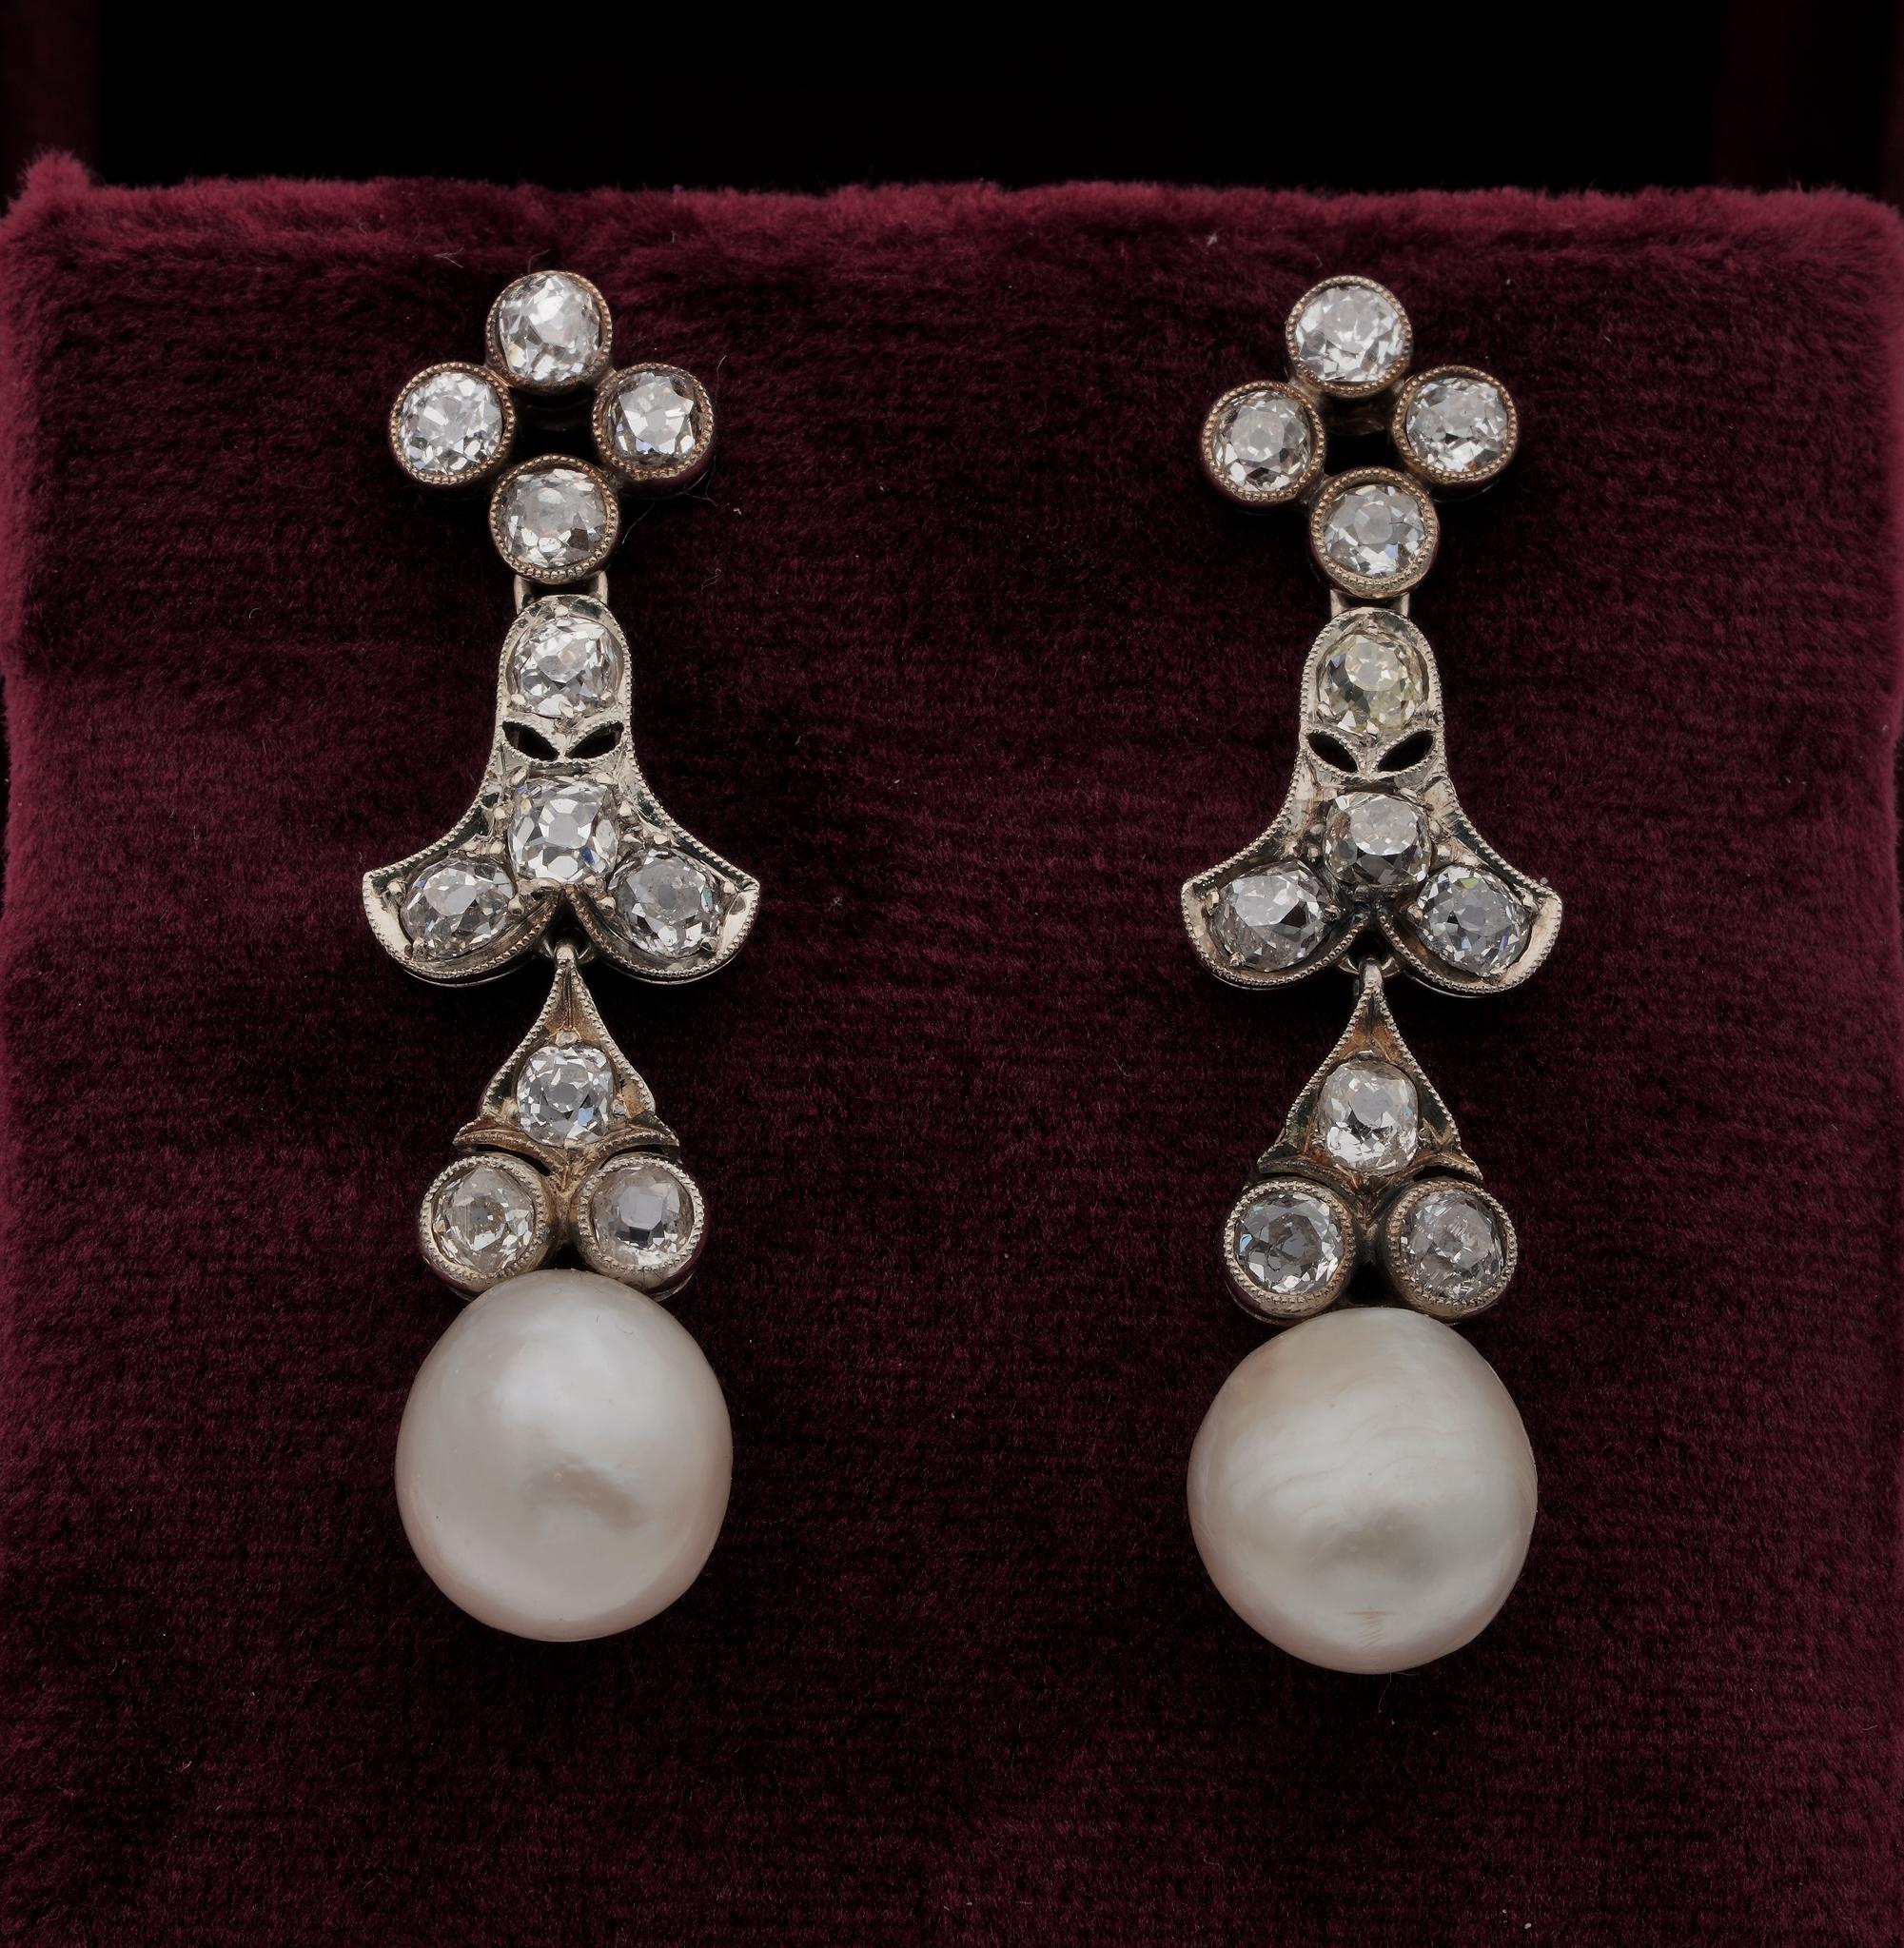 The Rarity Corner

Natural pearls are one of the rarest of gems and are currently highly sought after for their rarity and beauty
Loving antiques leads to learn the fashion of a bygone period becoming a keeper for the next generations to